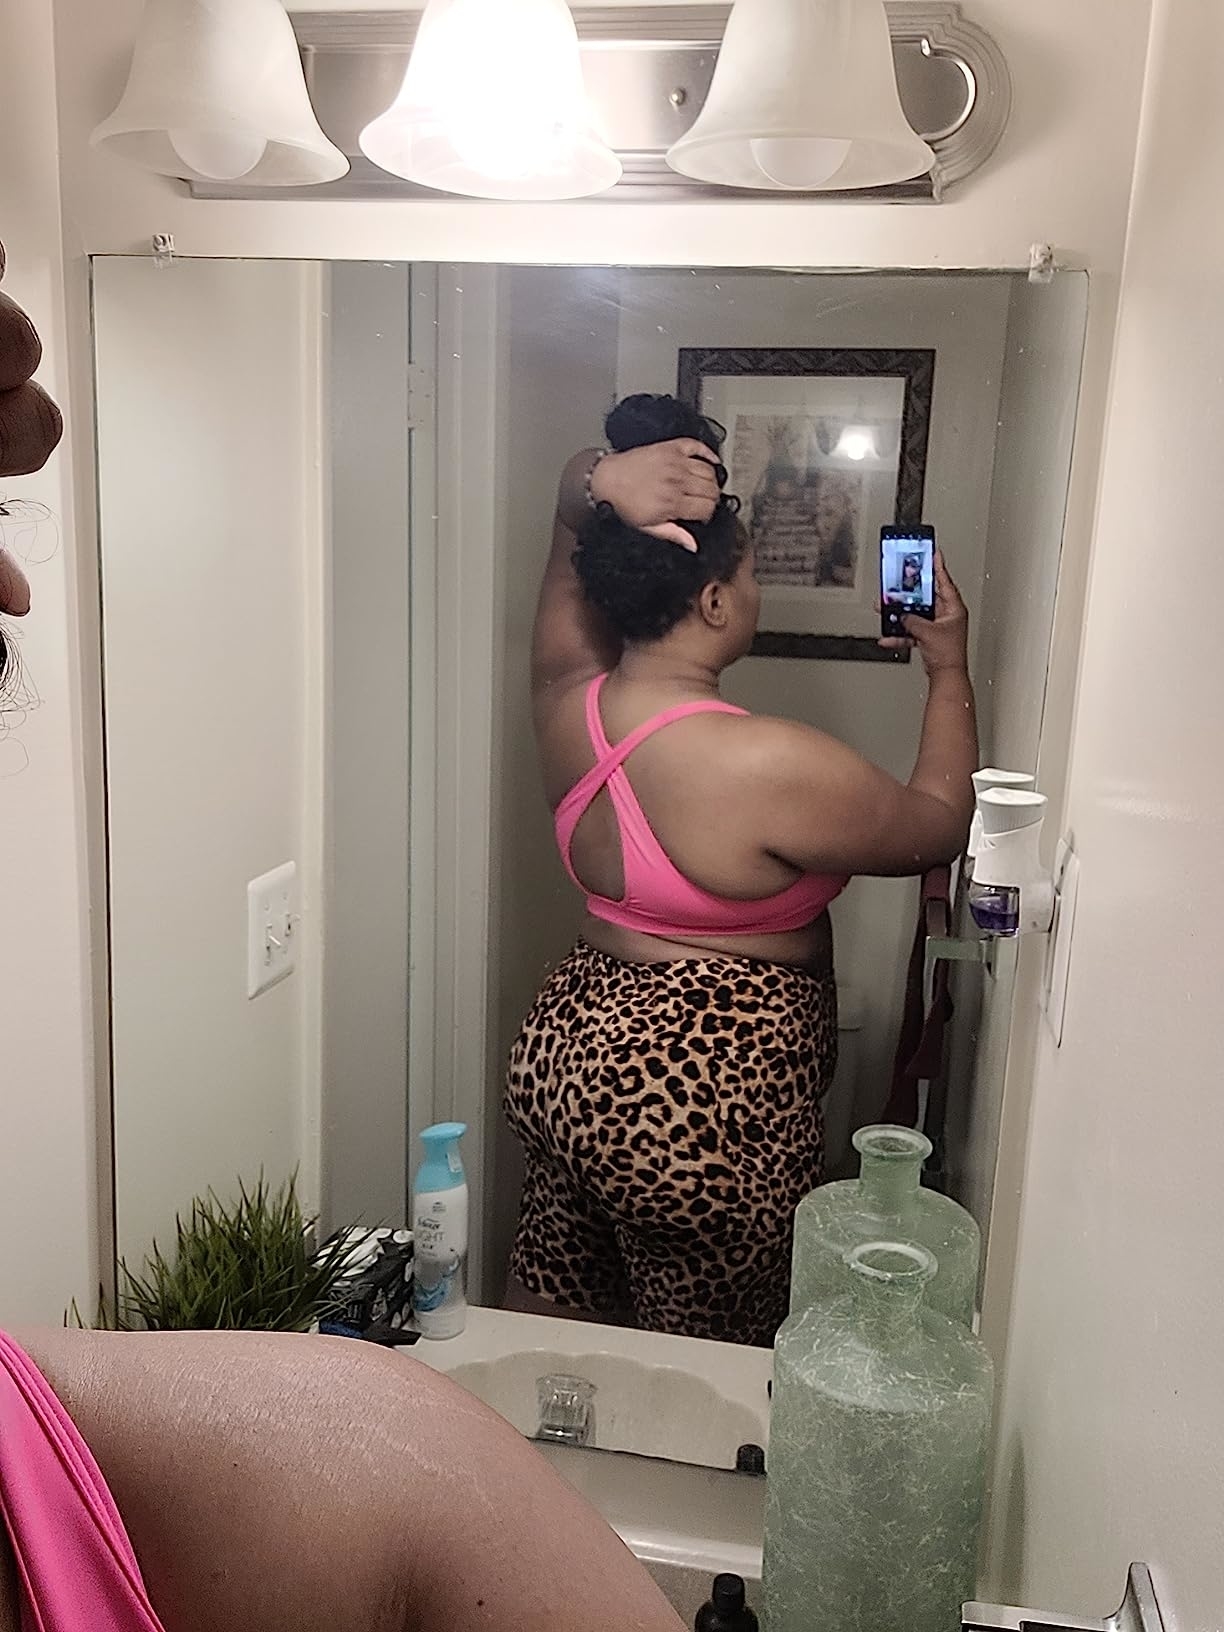 A reviewer wearing cheetah print shorts with a pink top